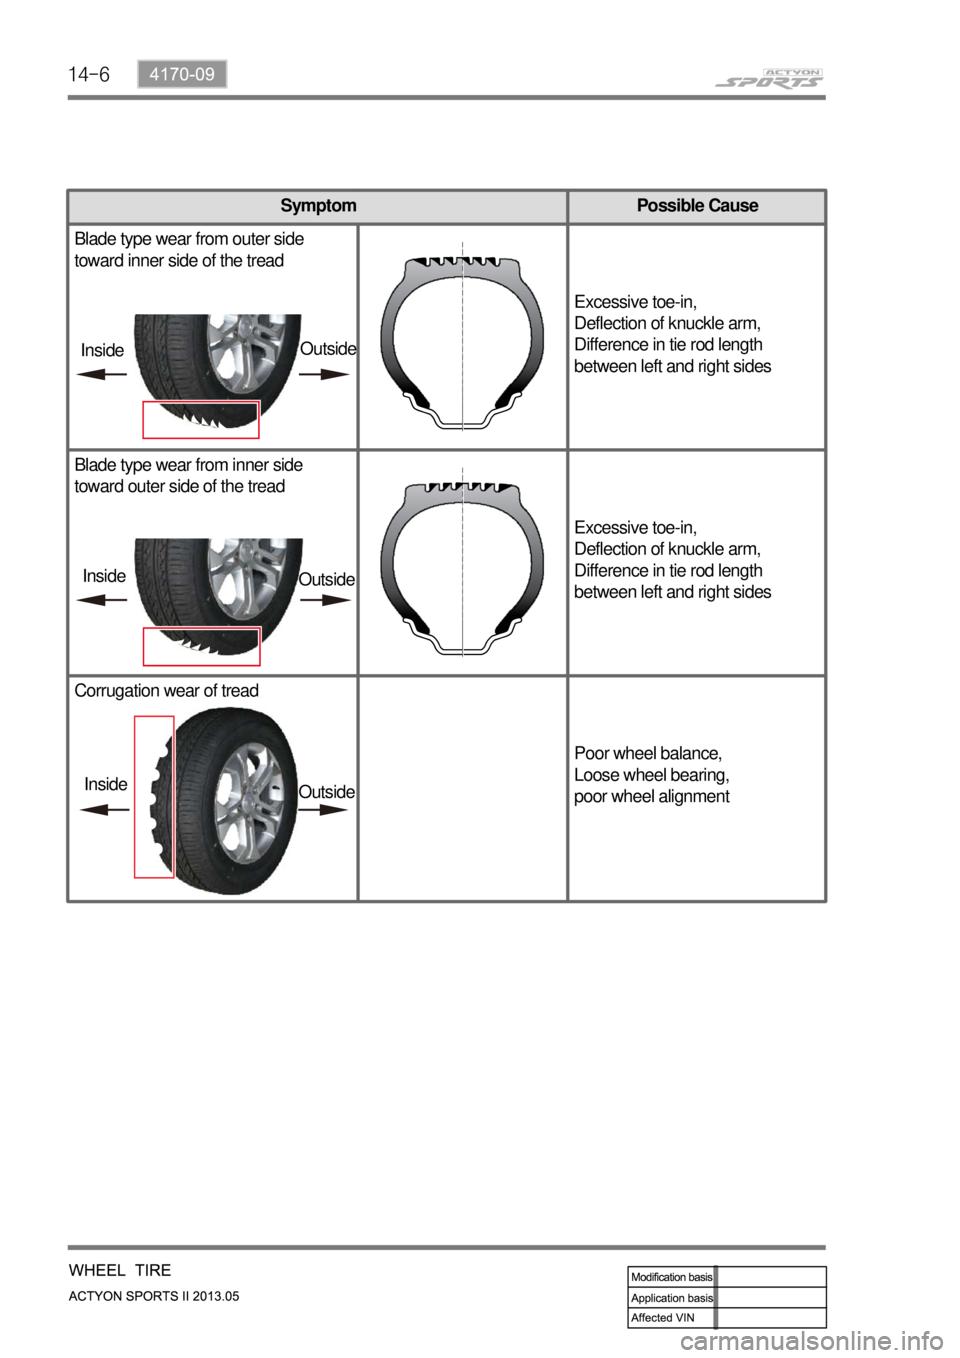 SSANGYONG NEW ACTYON SPORTS 2013  Service Manual 14-6
Symptom Possible Cause
Blade type wear from outer side 
toward inner side of the tread
Excessive toe-in,
Deflection of knuckle arm,
Difference in tie rod length 
between left and right sides
Blad